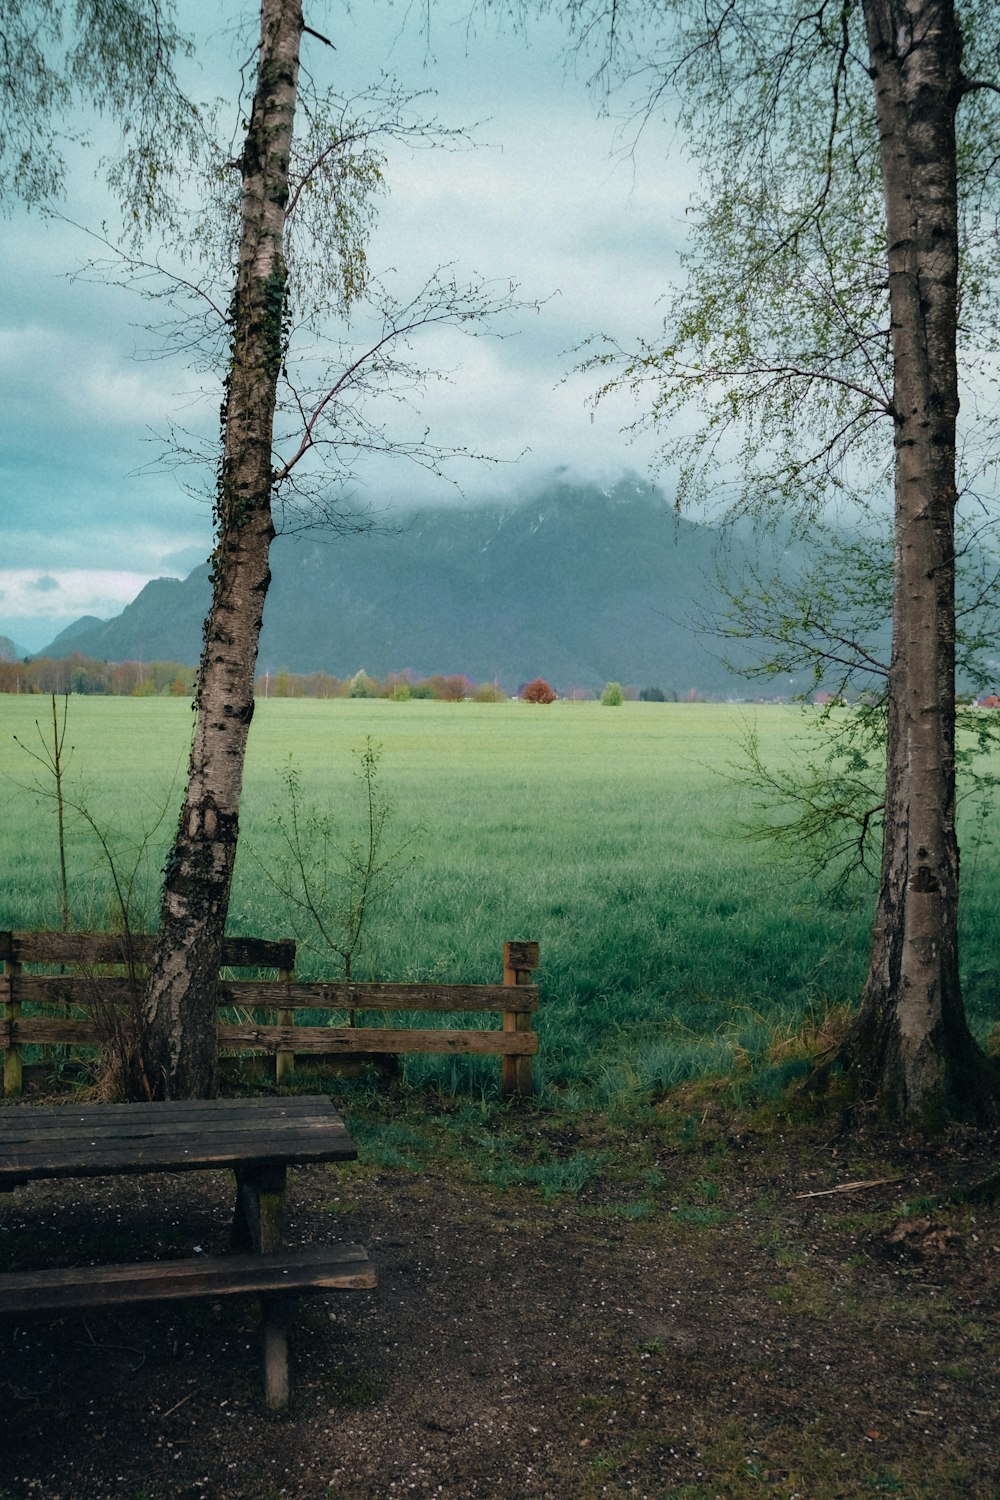 a wooden bench sitting in the middle of a lush green field